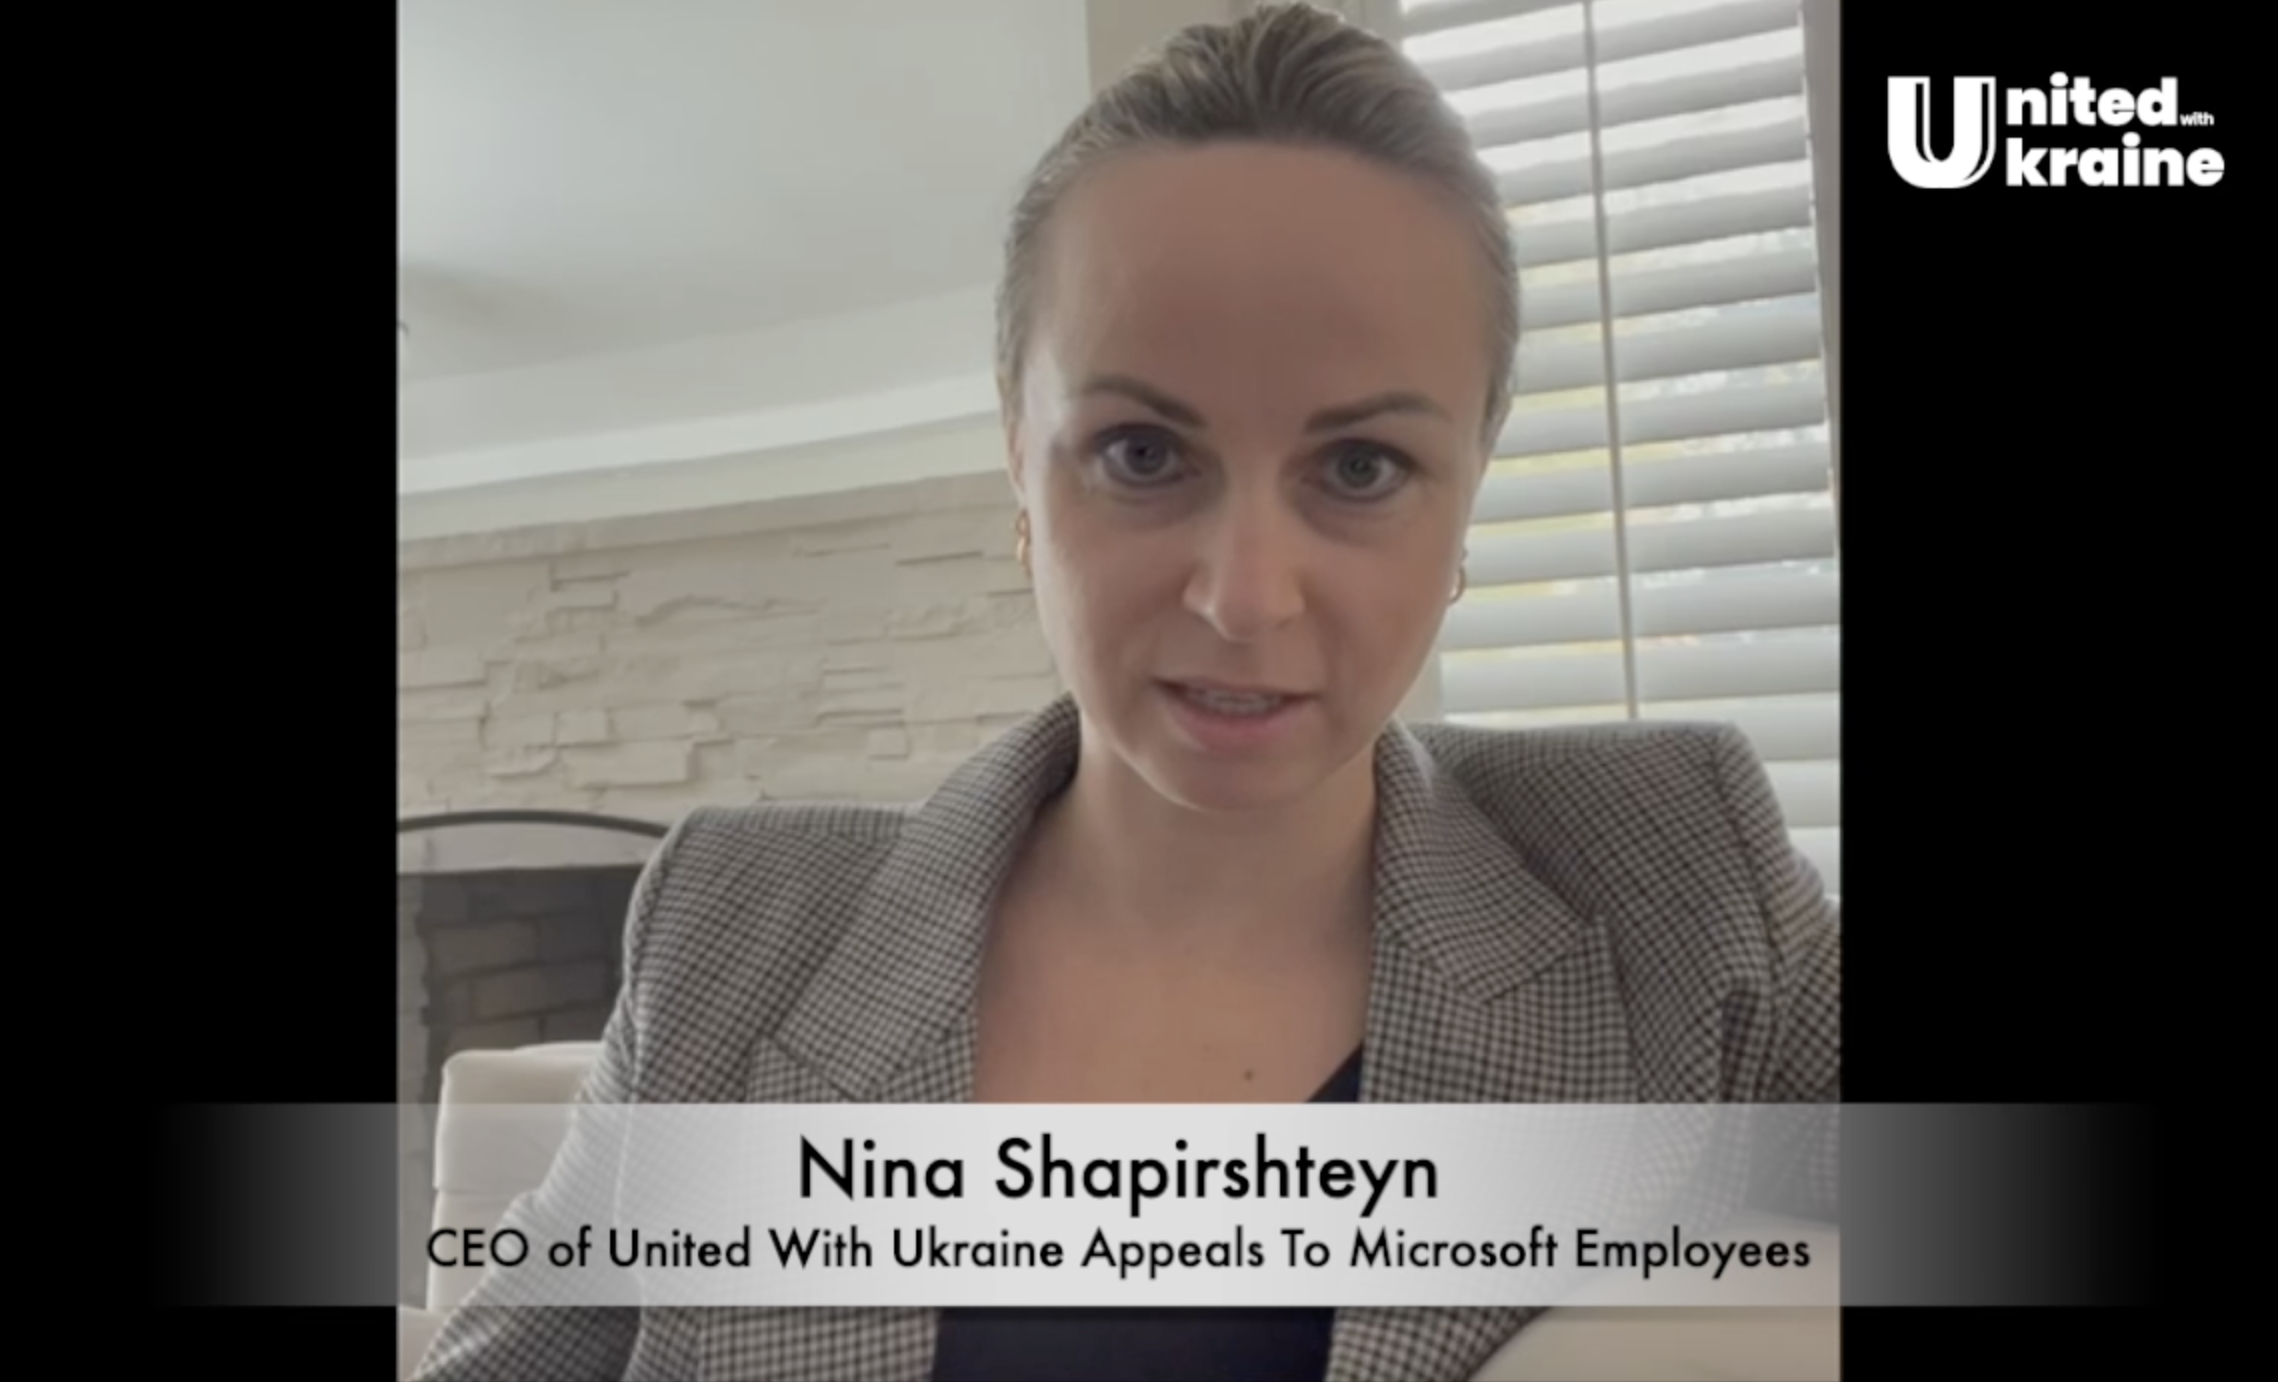 United With Ukraine, Our CEO Nina Shapirshteyn Appeals to Microsoft Employees to Help Collect Funds for Ukraine. Watch the video appeal